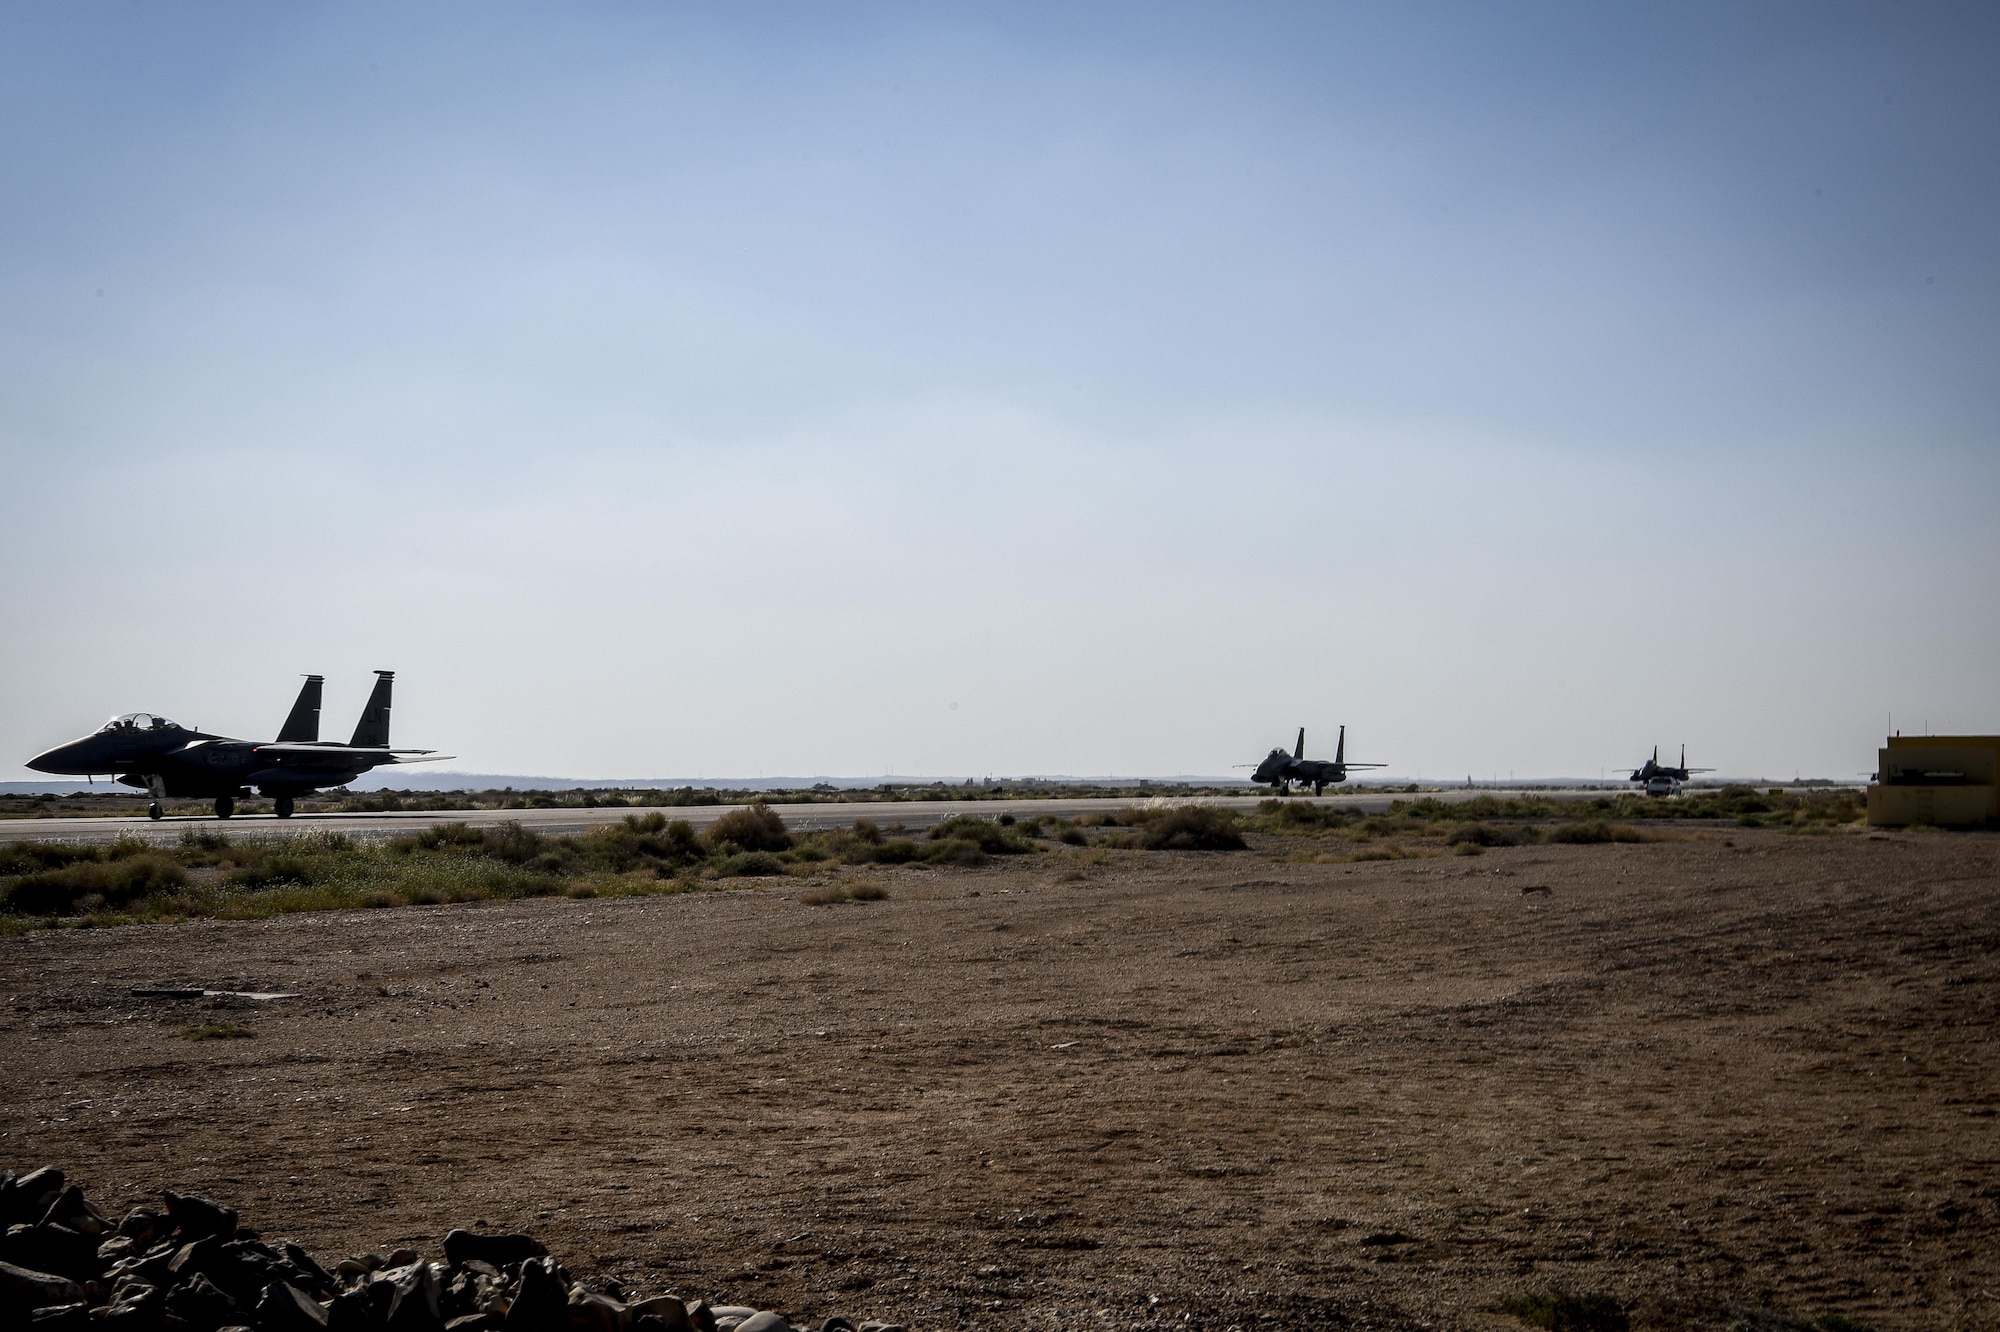 Three F-15 Strike Eagles taxi on a runway an undisclosed location in Southwest Asia, April 7, 2017. The jets are deployed from the 492nd Fighter Squadron at RAF Lakenheath, England. These Strike Eagles have taken over for those that belong to the 389th Expeditionary Fighter Squadron that was deployed to the 332nd Air Expeditionary Wing for the last six months. (U.S. Air Force photo by Tech Sgt. Eboni Reams)